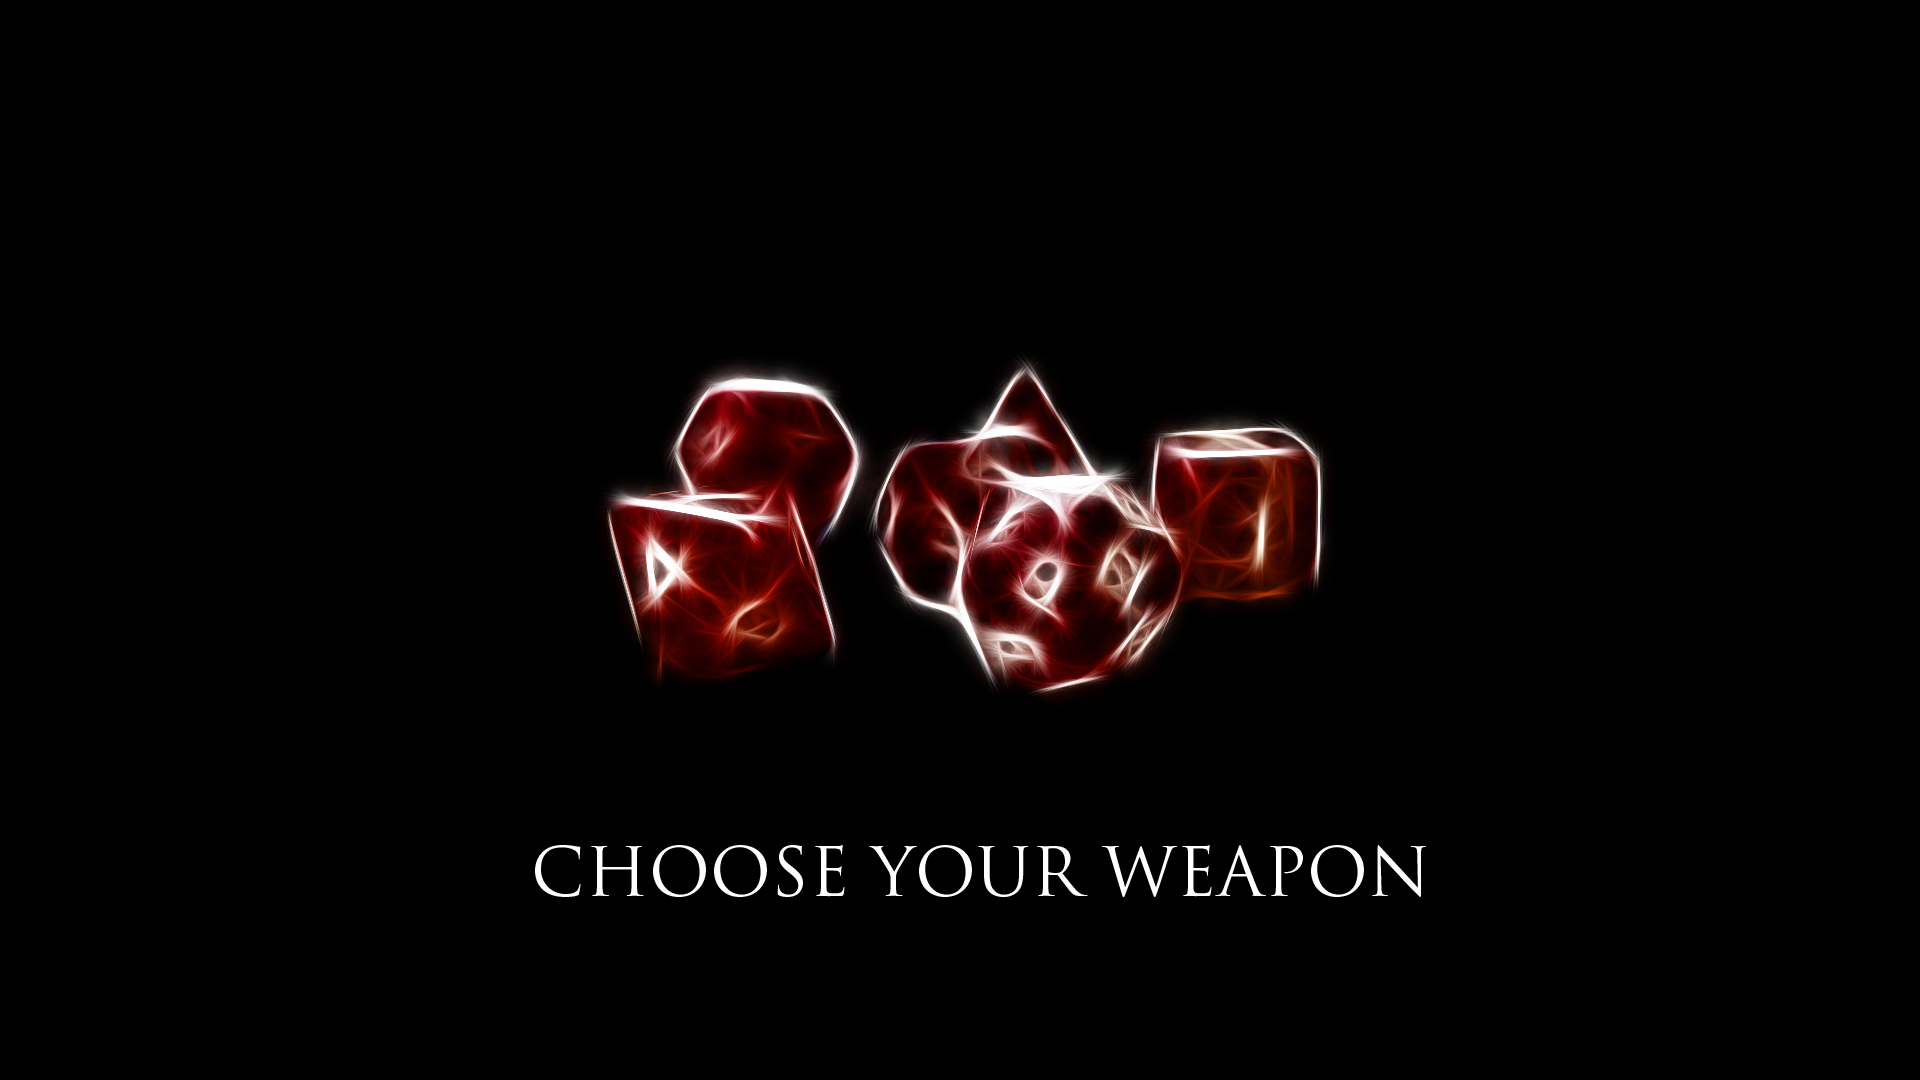 Choose Your Weapon 1920x1080 HD Wallpaper by TheRierie on DeviantArt